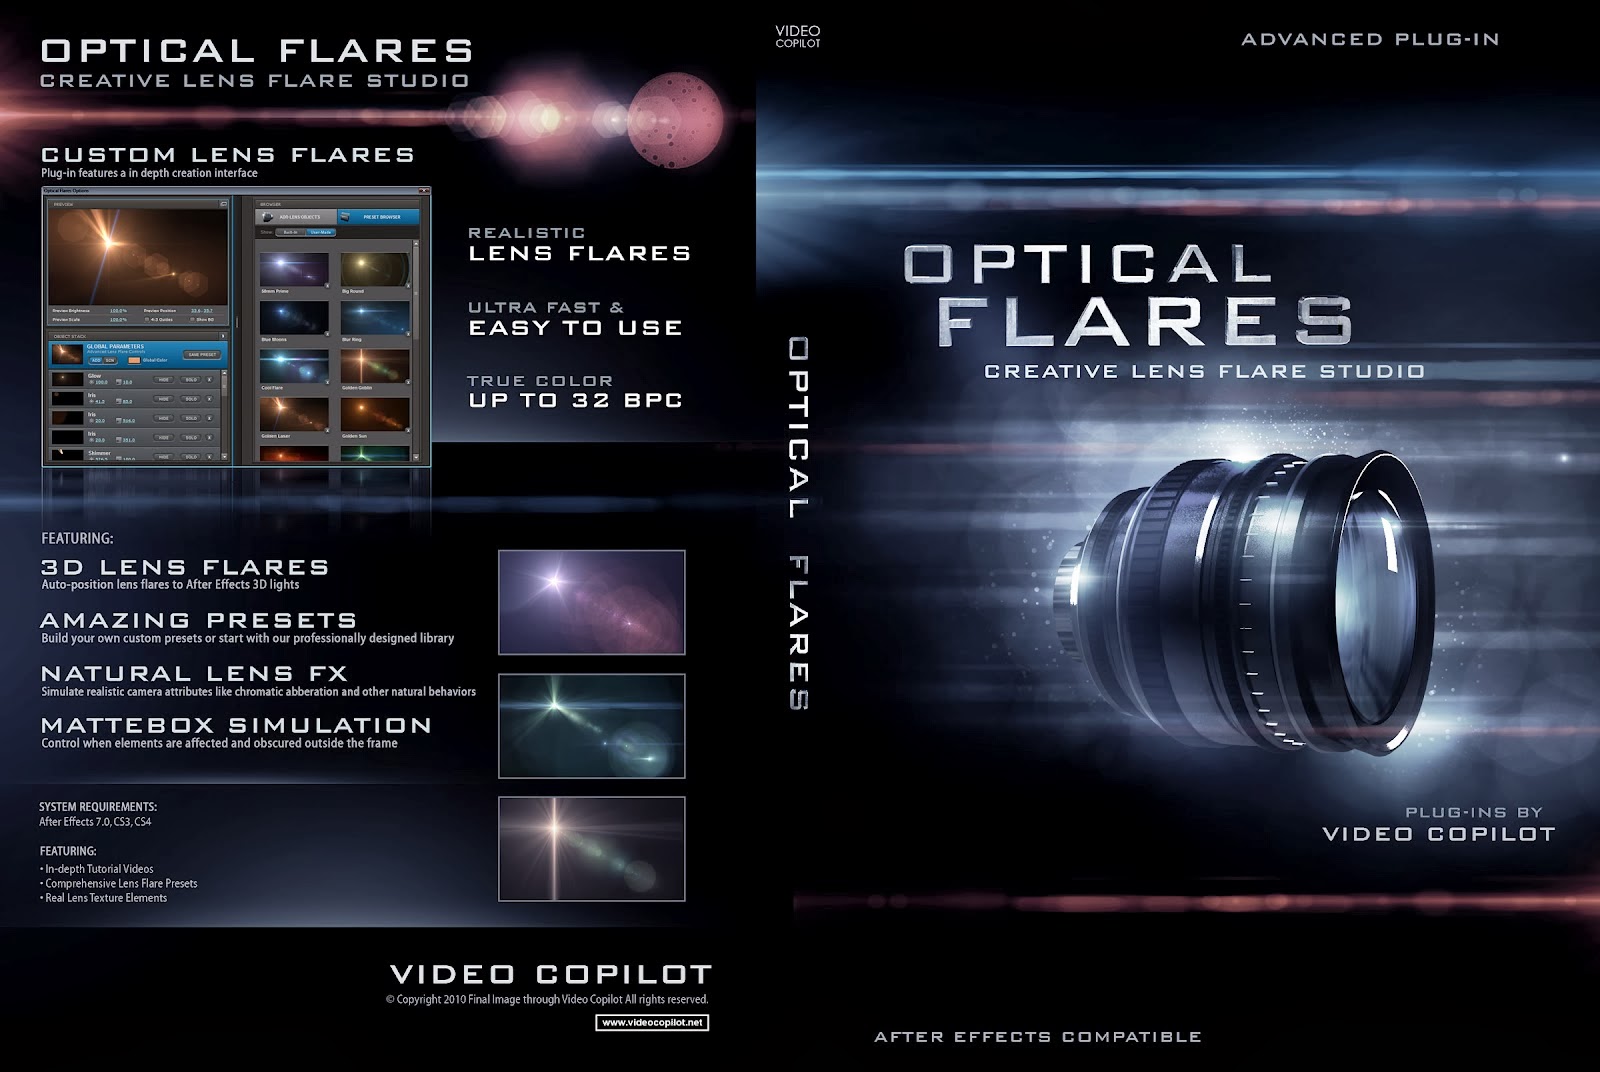 Element video. Optical Flares плагин. Optical Flares для after Effects. Пресеты Optical Flares. Optical Flares плагин Adobe after Effects.